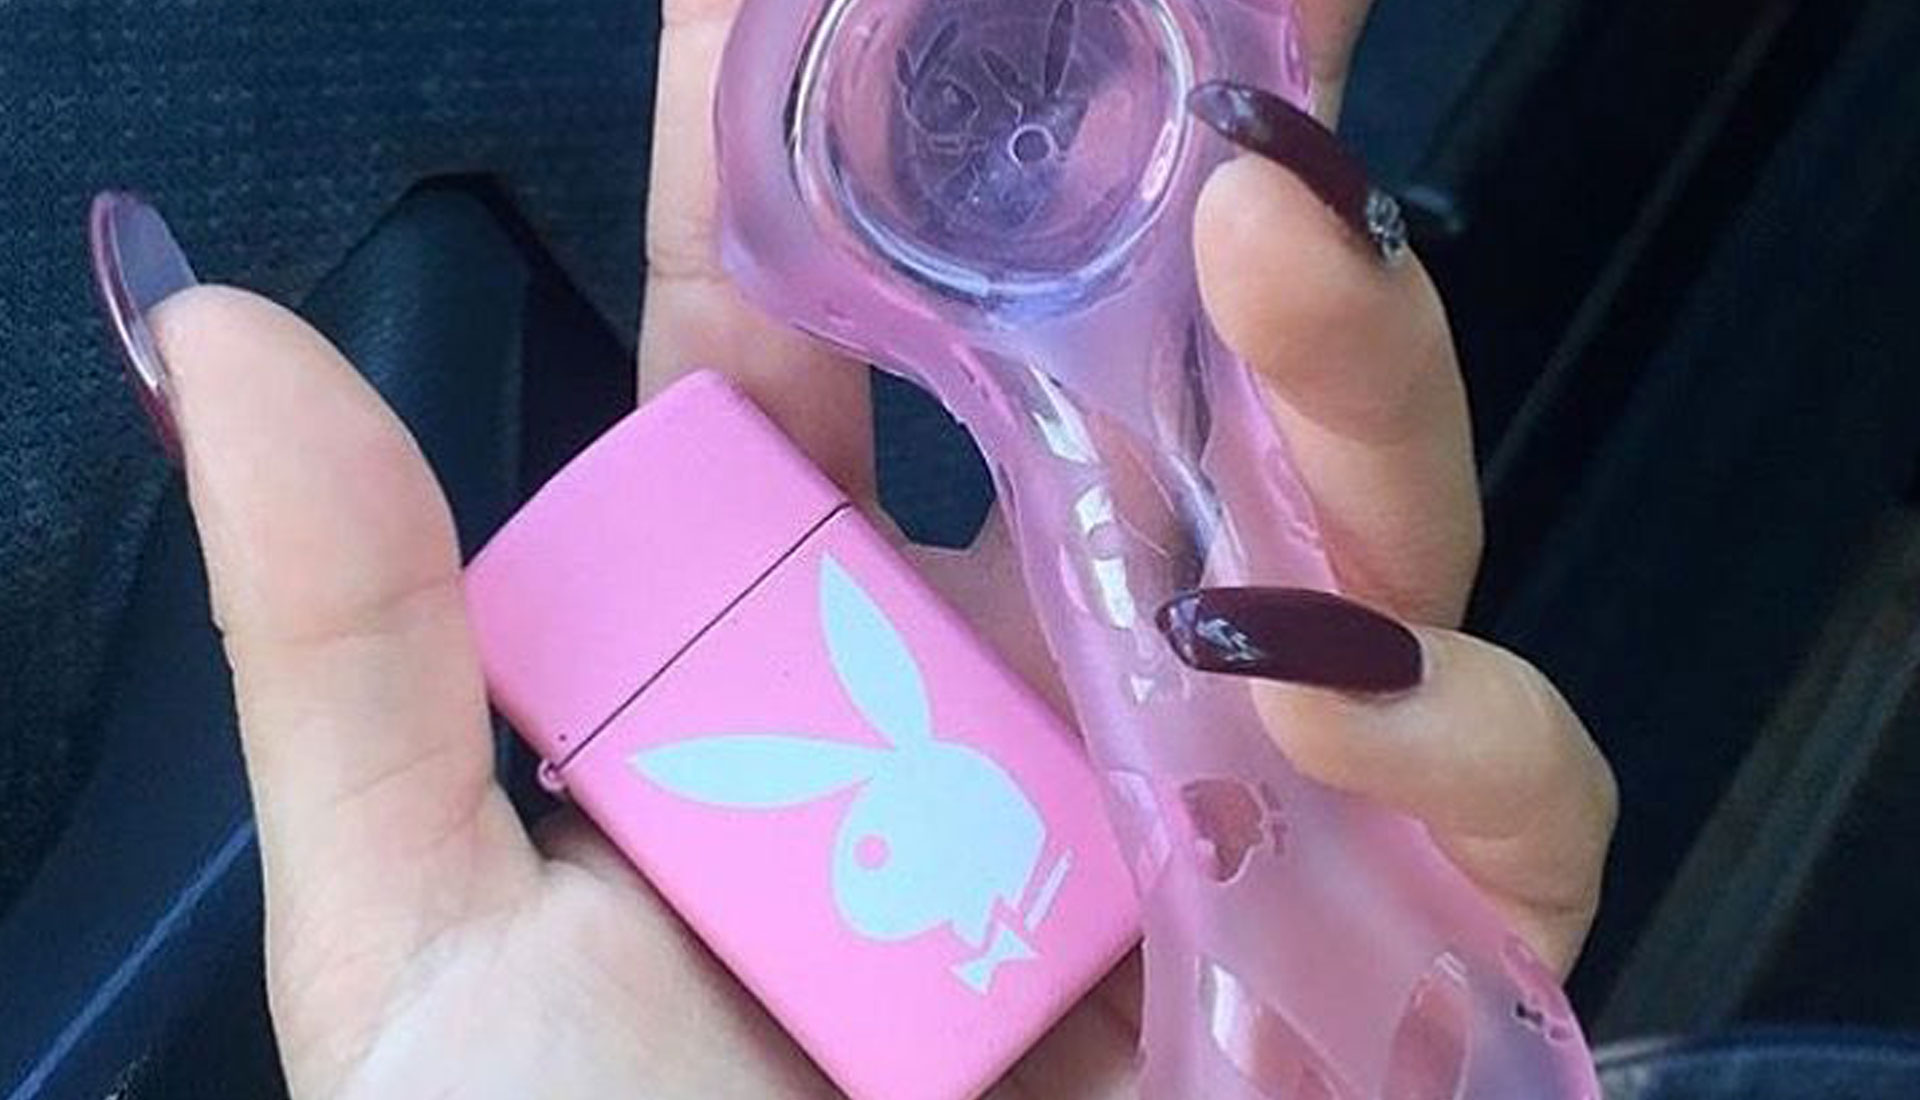 Top 10 Best Pink Weed Pipes [List & Guide]